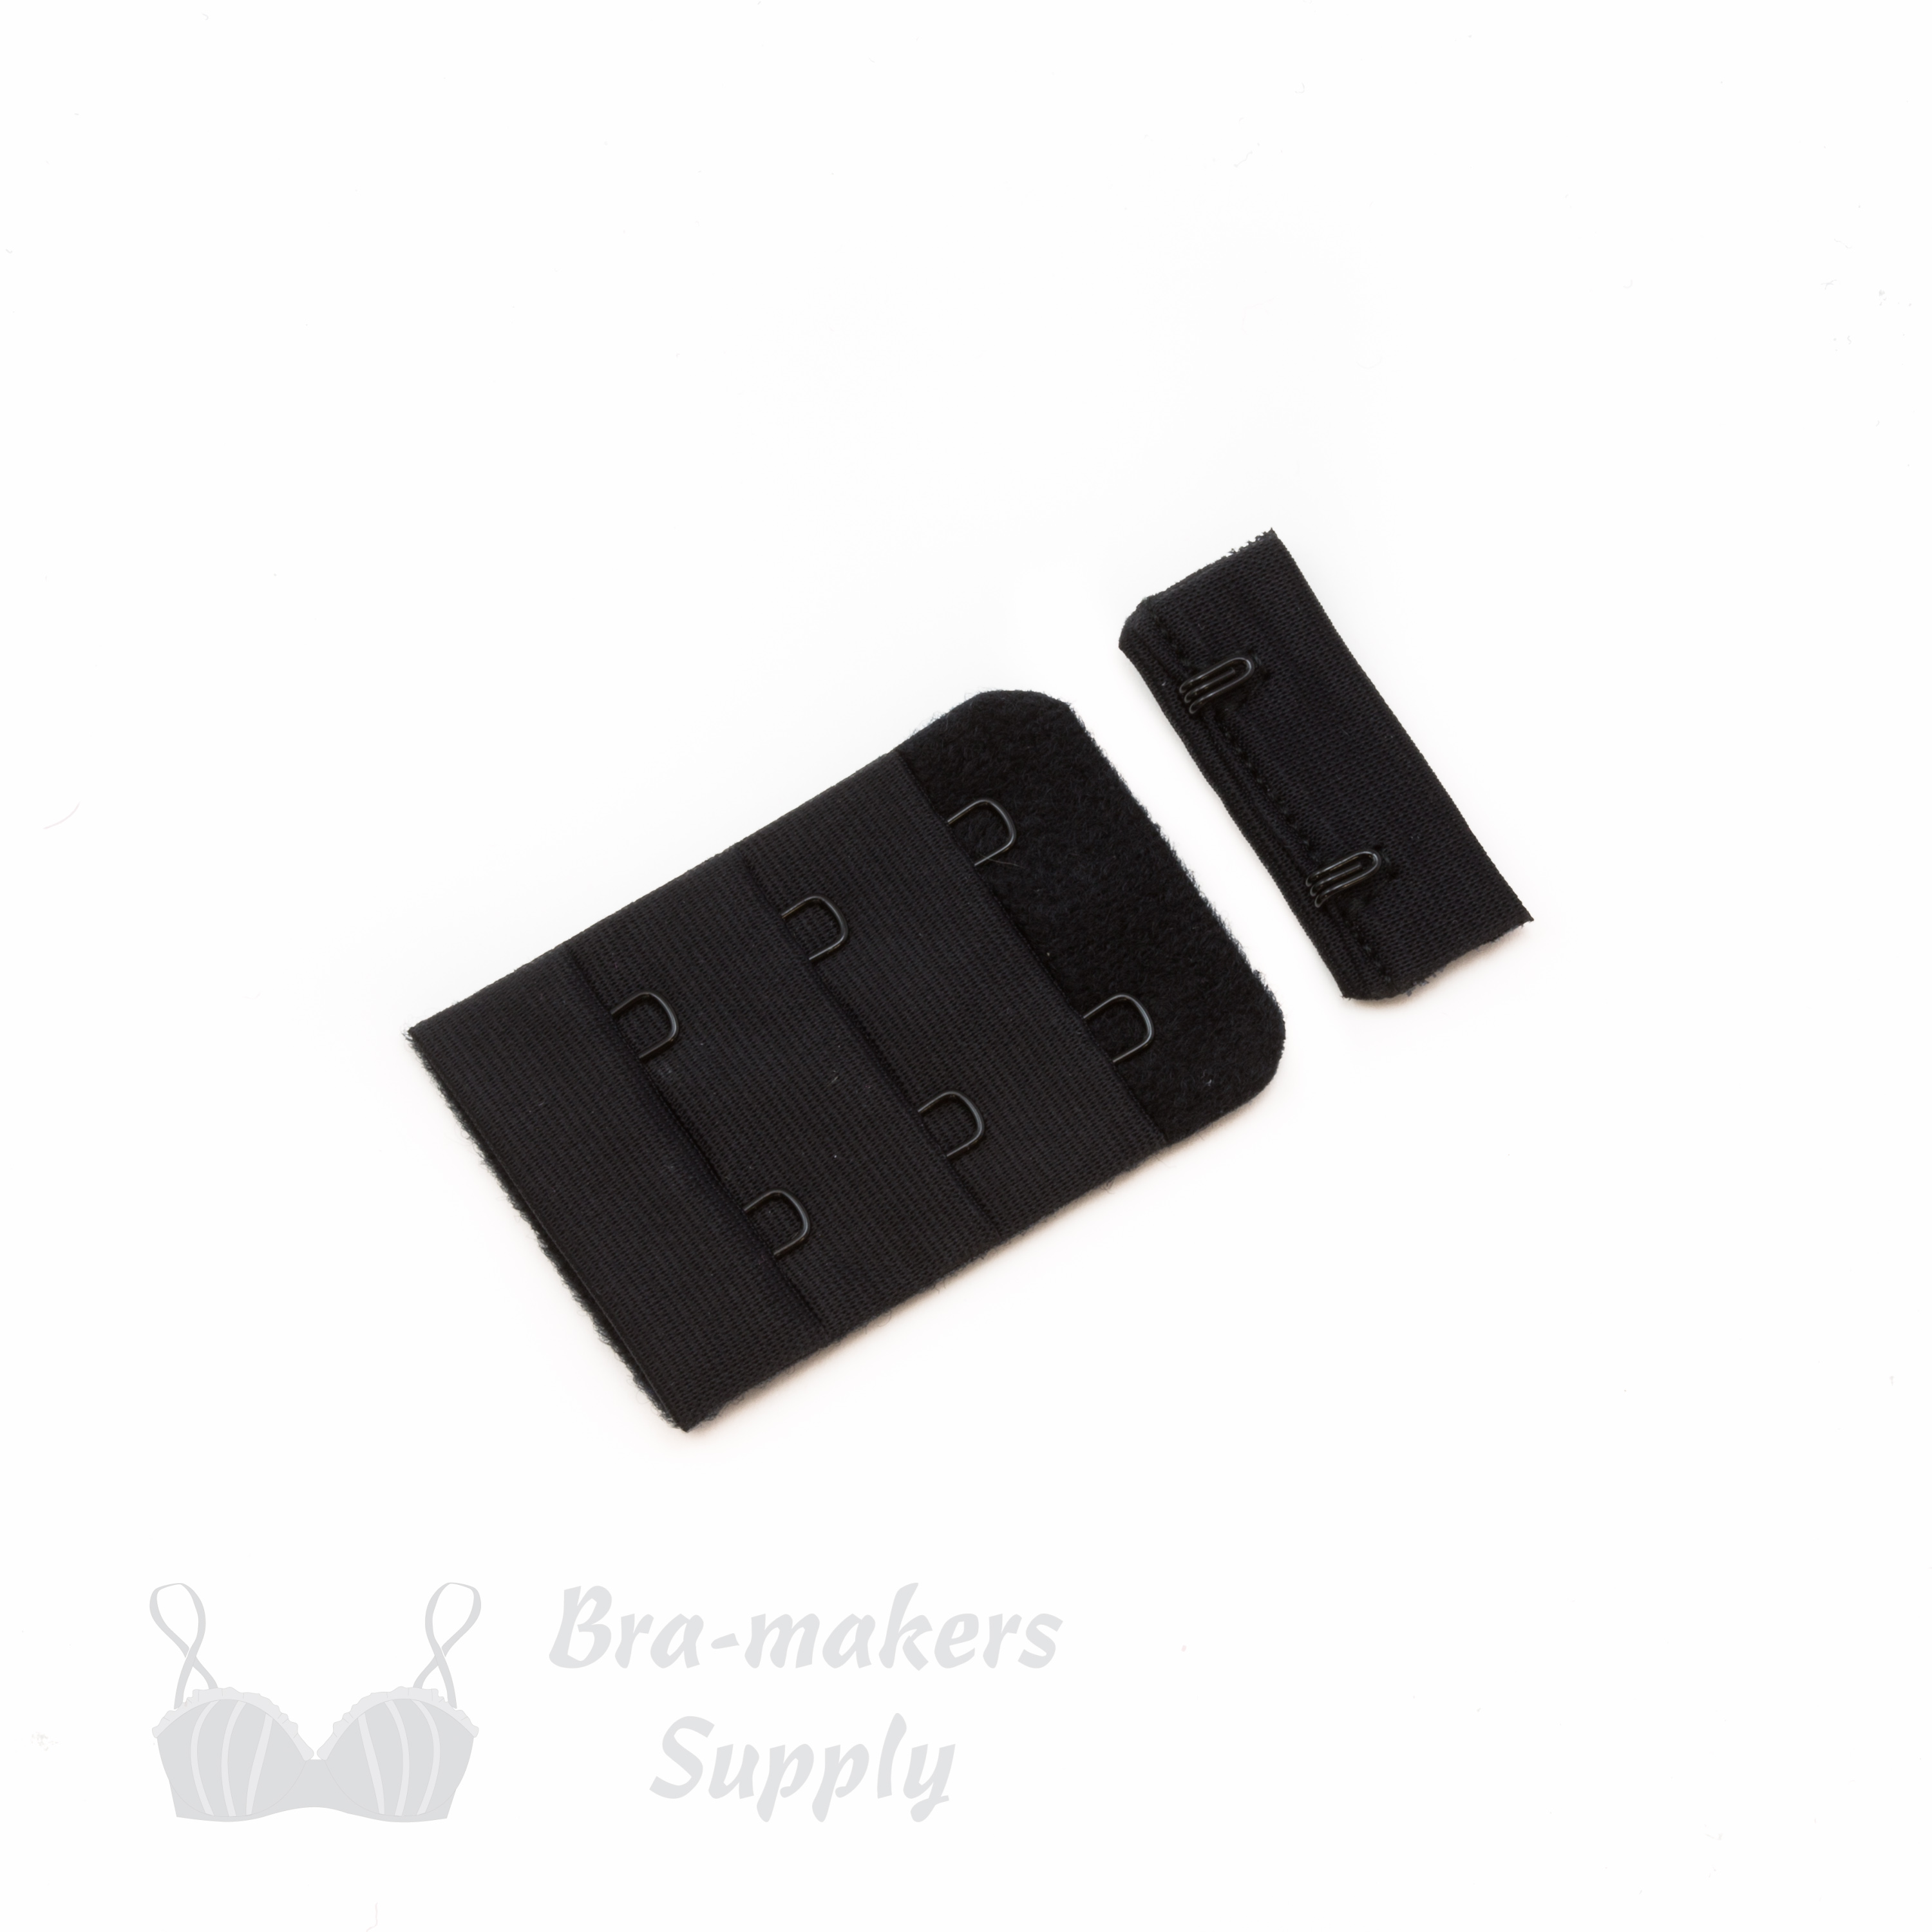 2x3 bra hook and eye black HS-23 or 2x3 hook and eye back closures anthracite Pantone 19-4007 from Bra-Makers Supply front shown